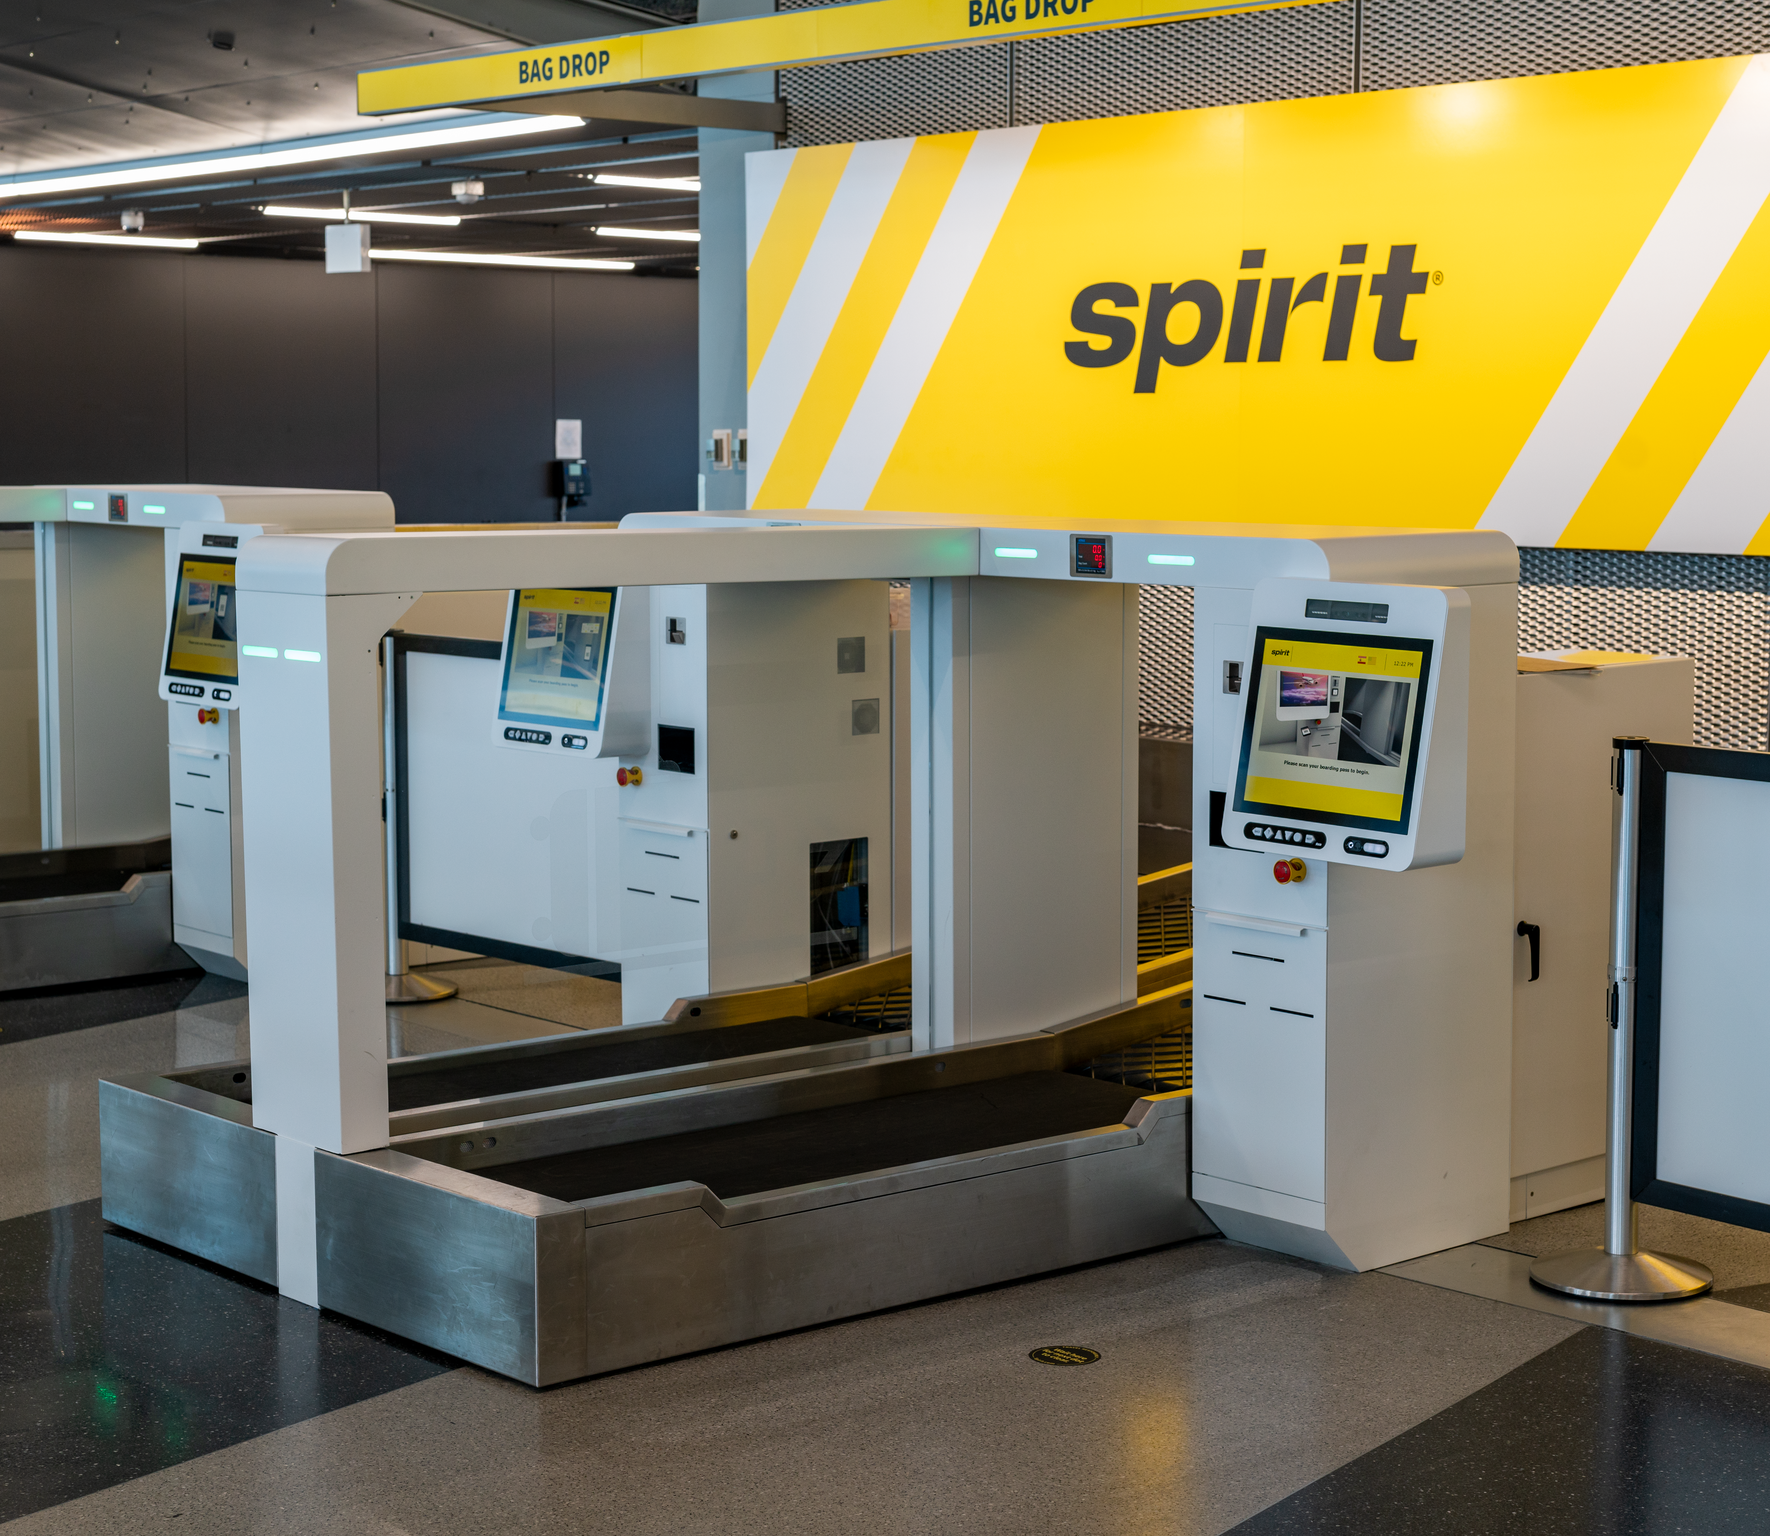 Spirit Airlines’s biometric bag drop with photo-matching. Source: Spirit Airlines